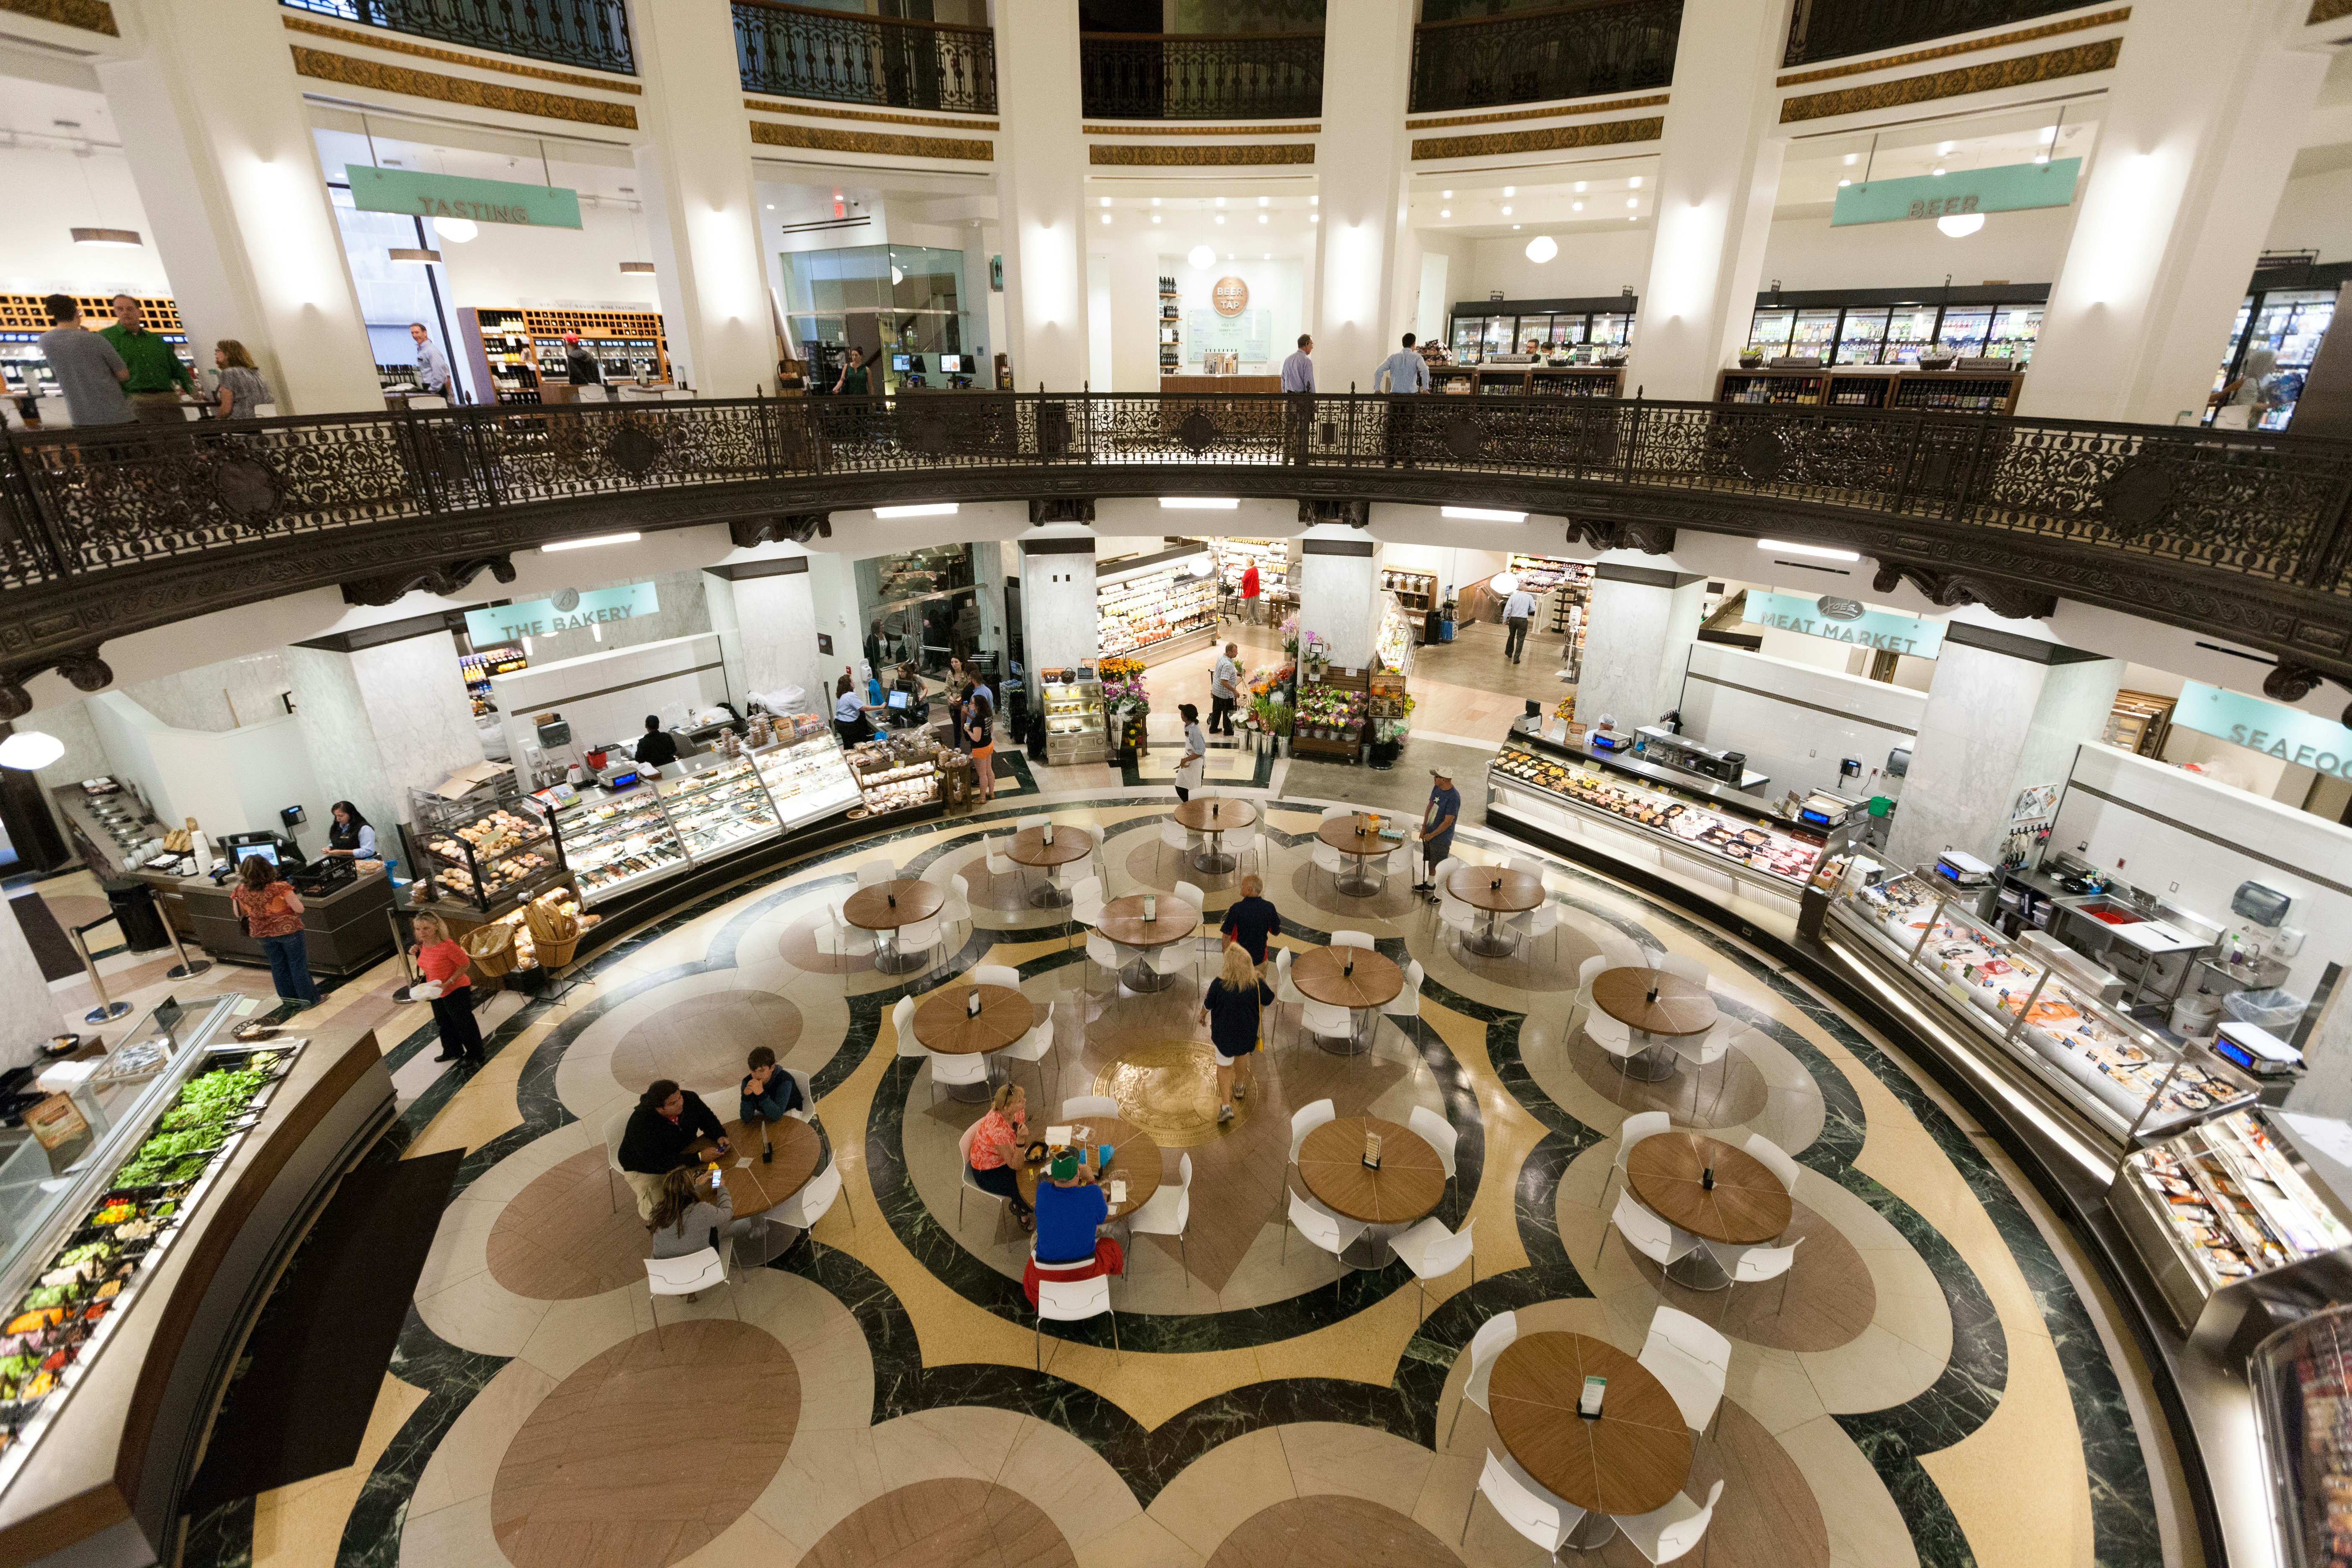 Looking down from a gallery to a cafeteria area inside Heinen's Fine Foods; there are several circular tables and the round space is lined with glass cabinets of food.